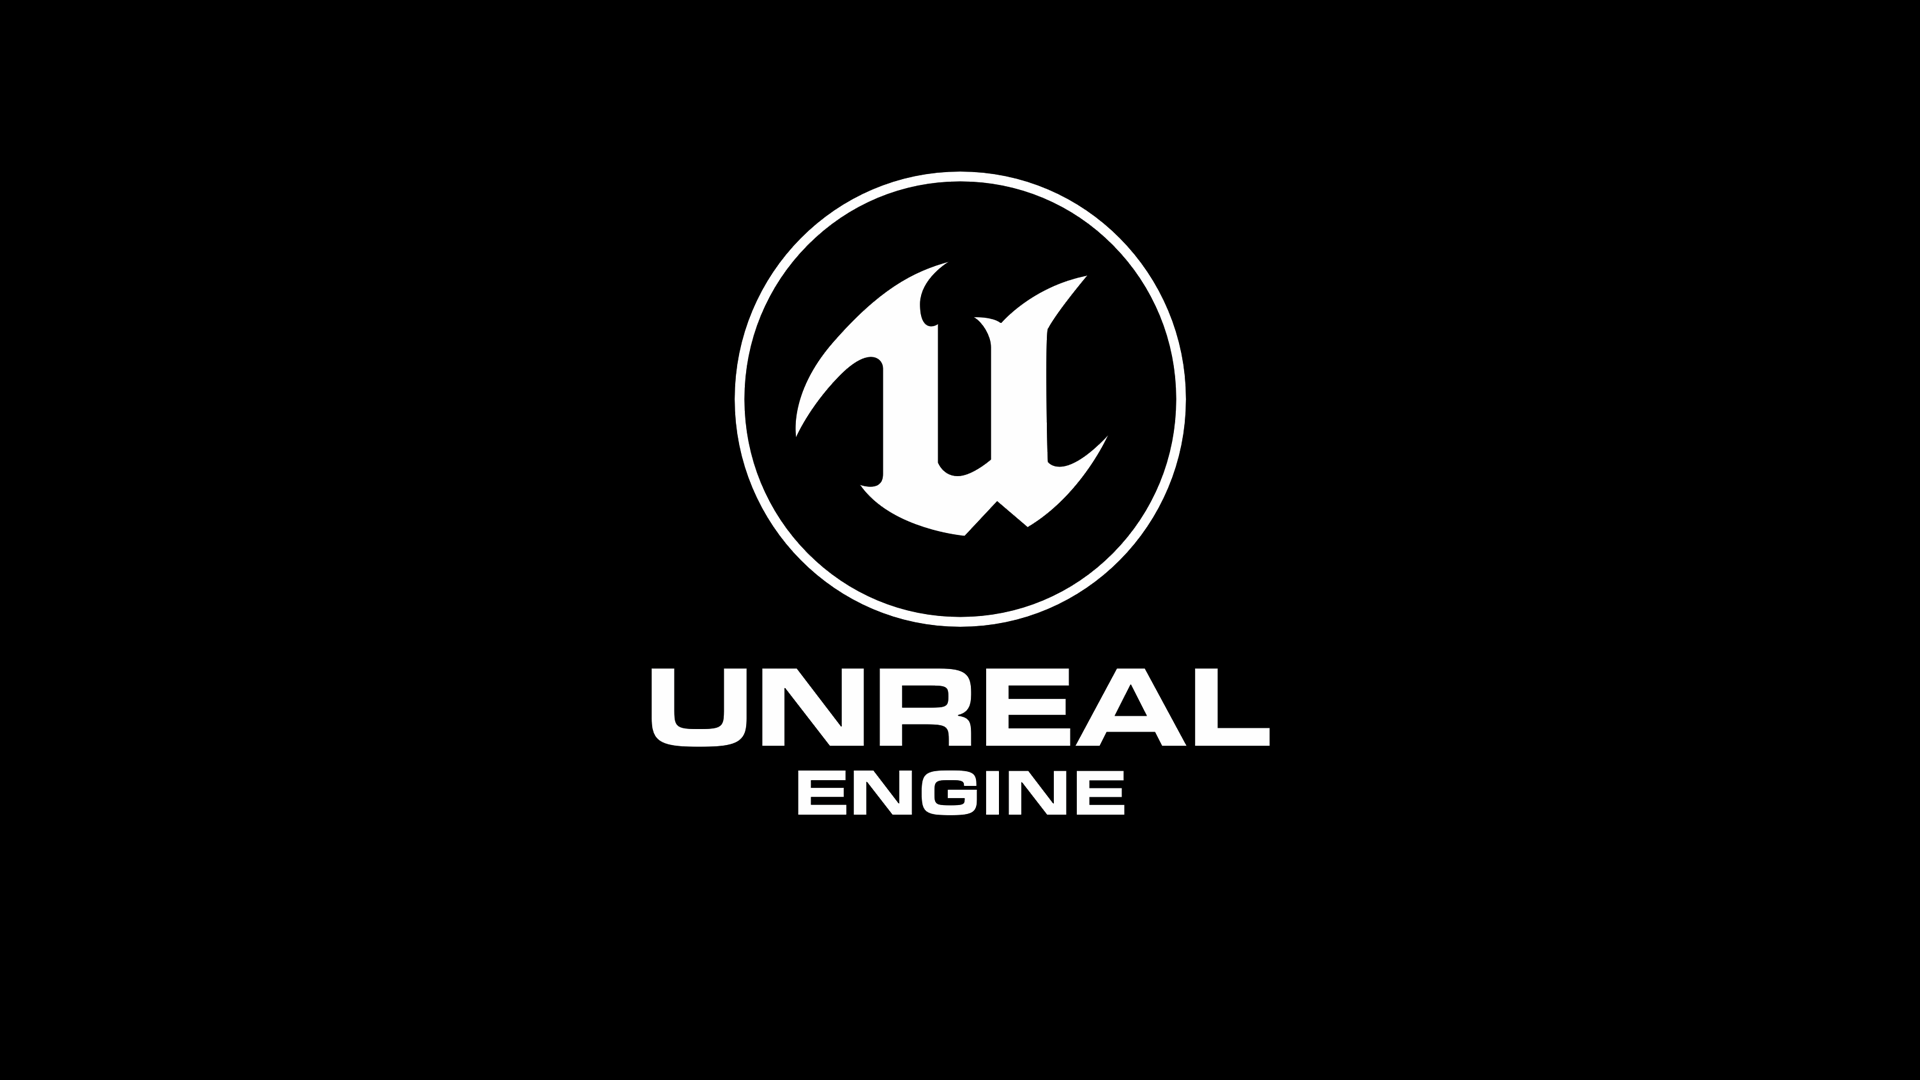 Unreal Engine Is Now Royalty Free For The First 1 Million In Revenue